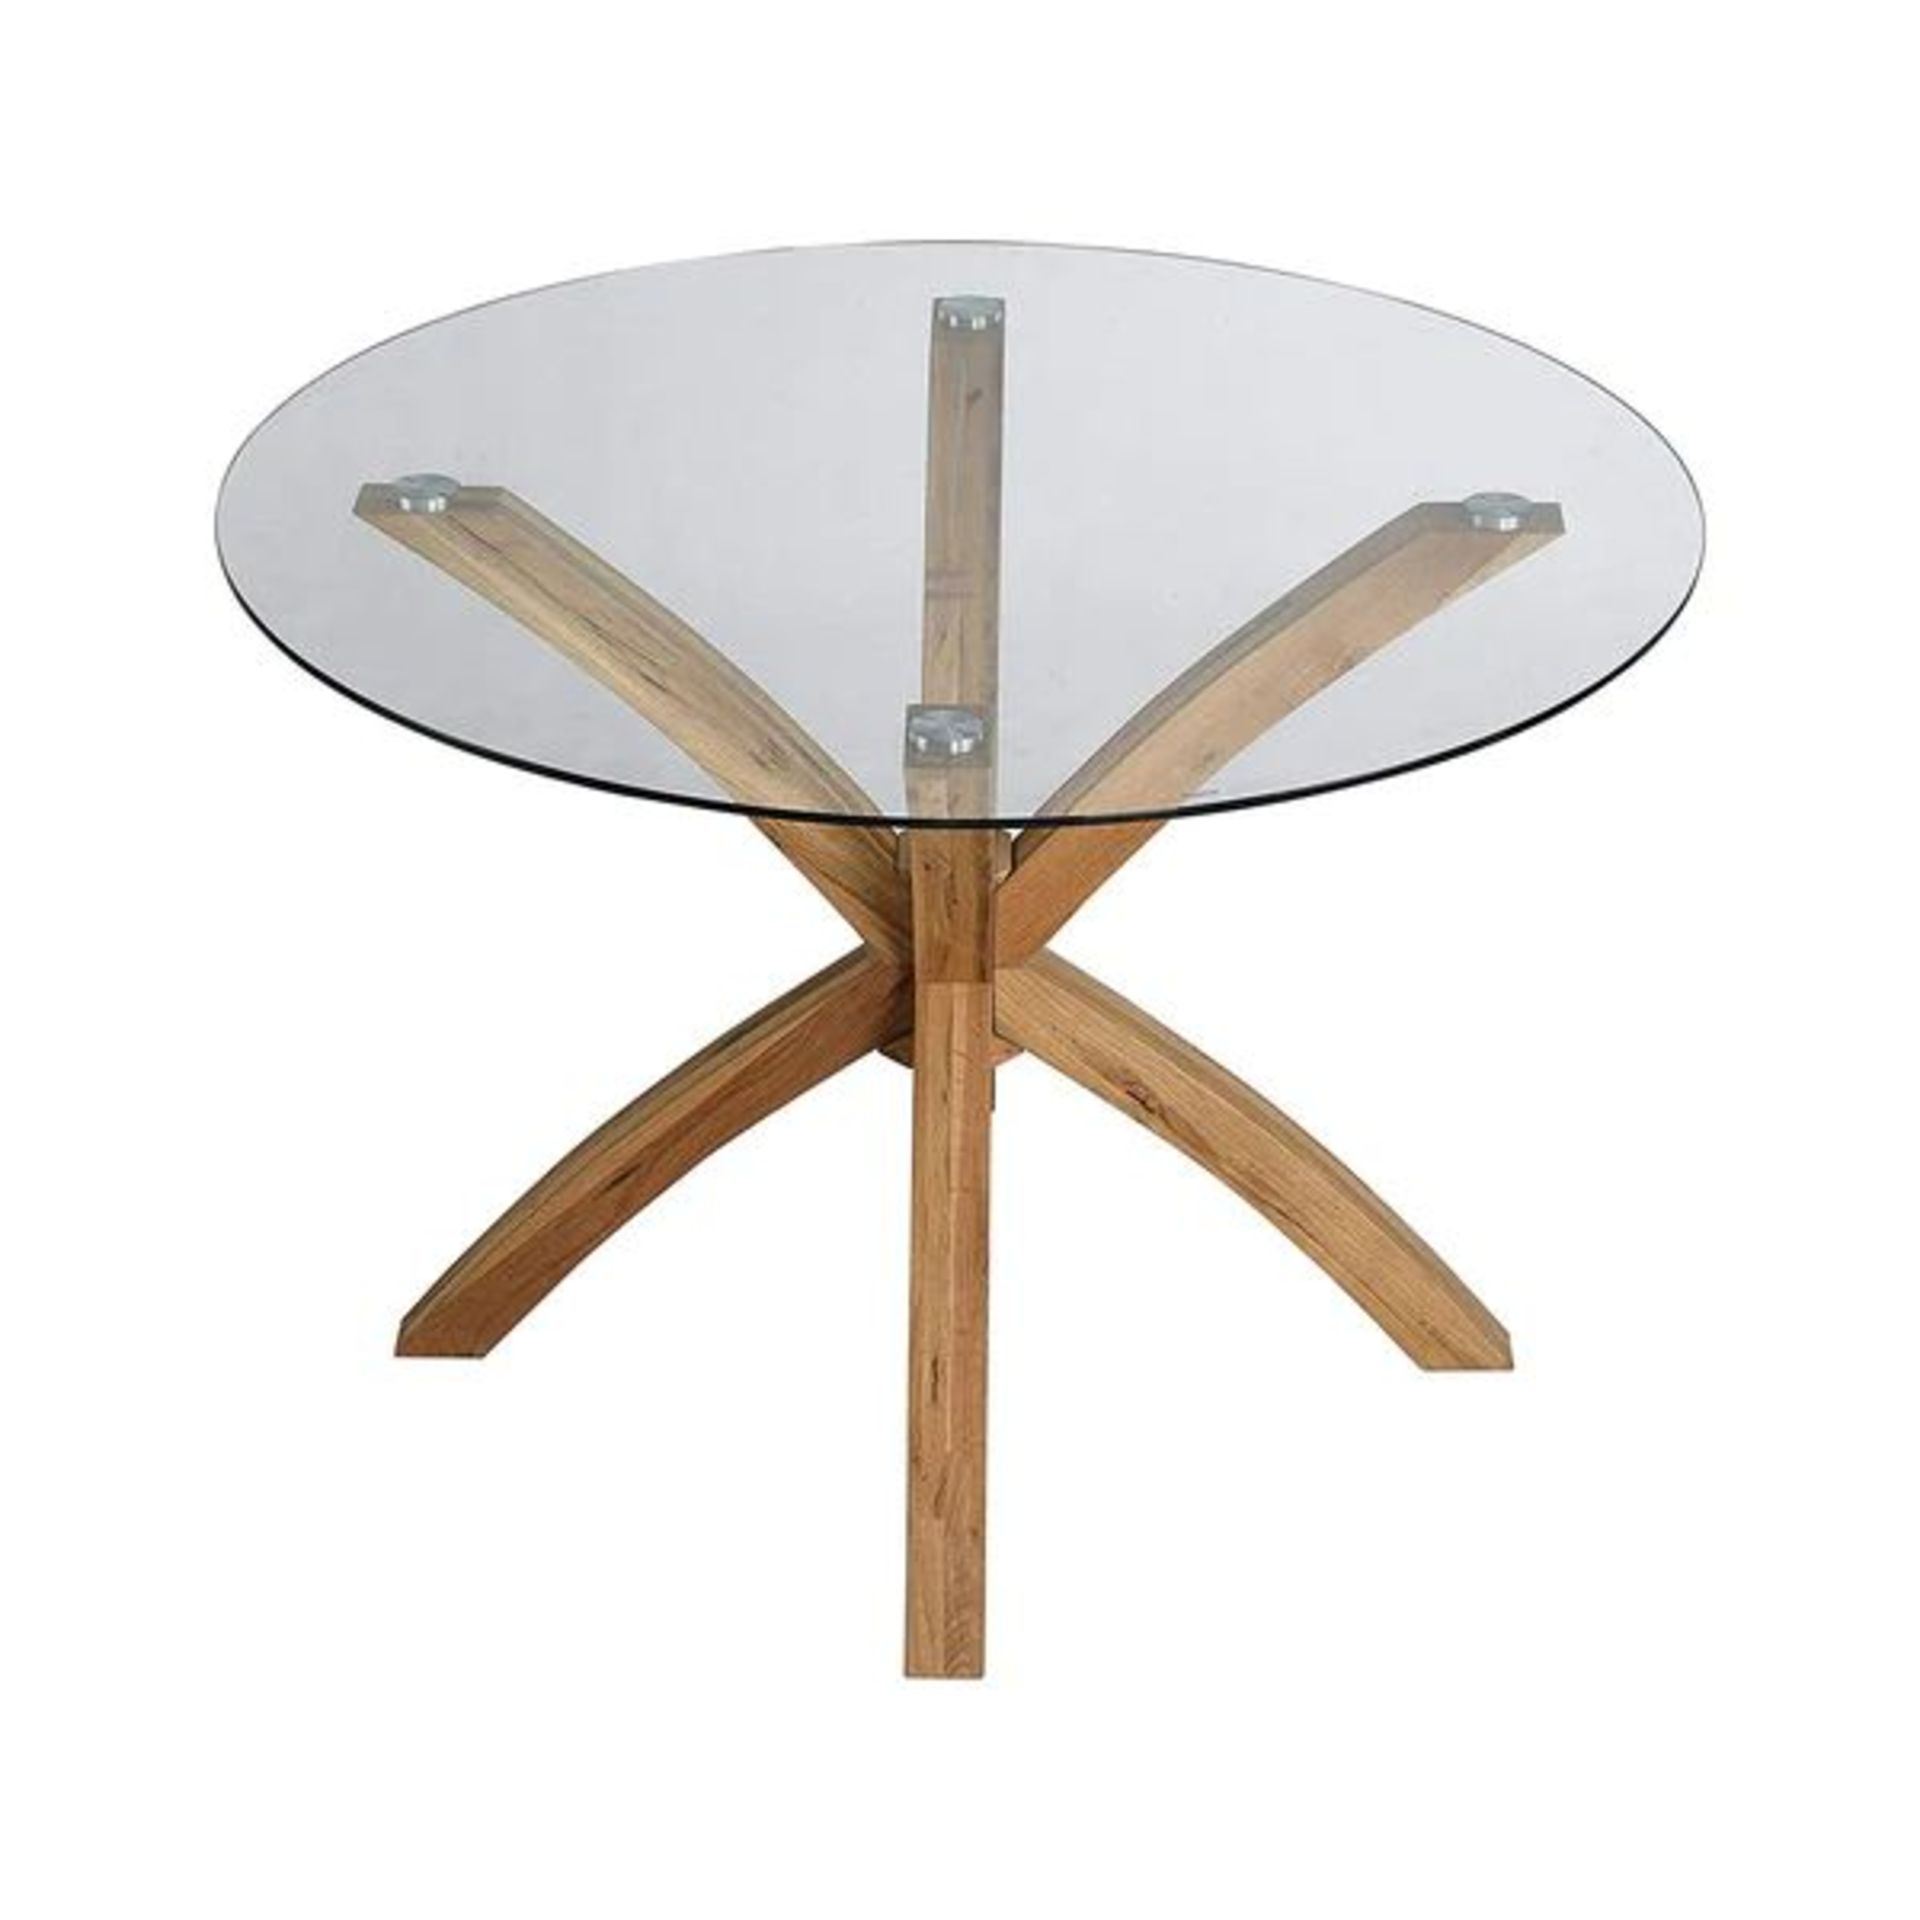 Lugano 110cm Round Glass Top Solid Oak Legs Dining Table. - BI. RRP £379.99. Featuring four subtly - Image 2 of 2